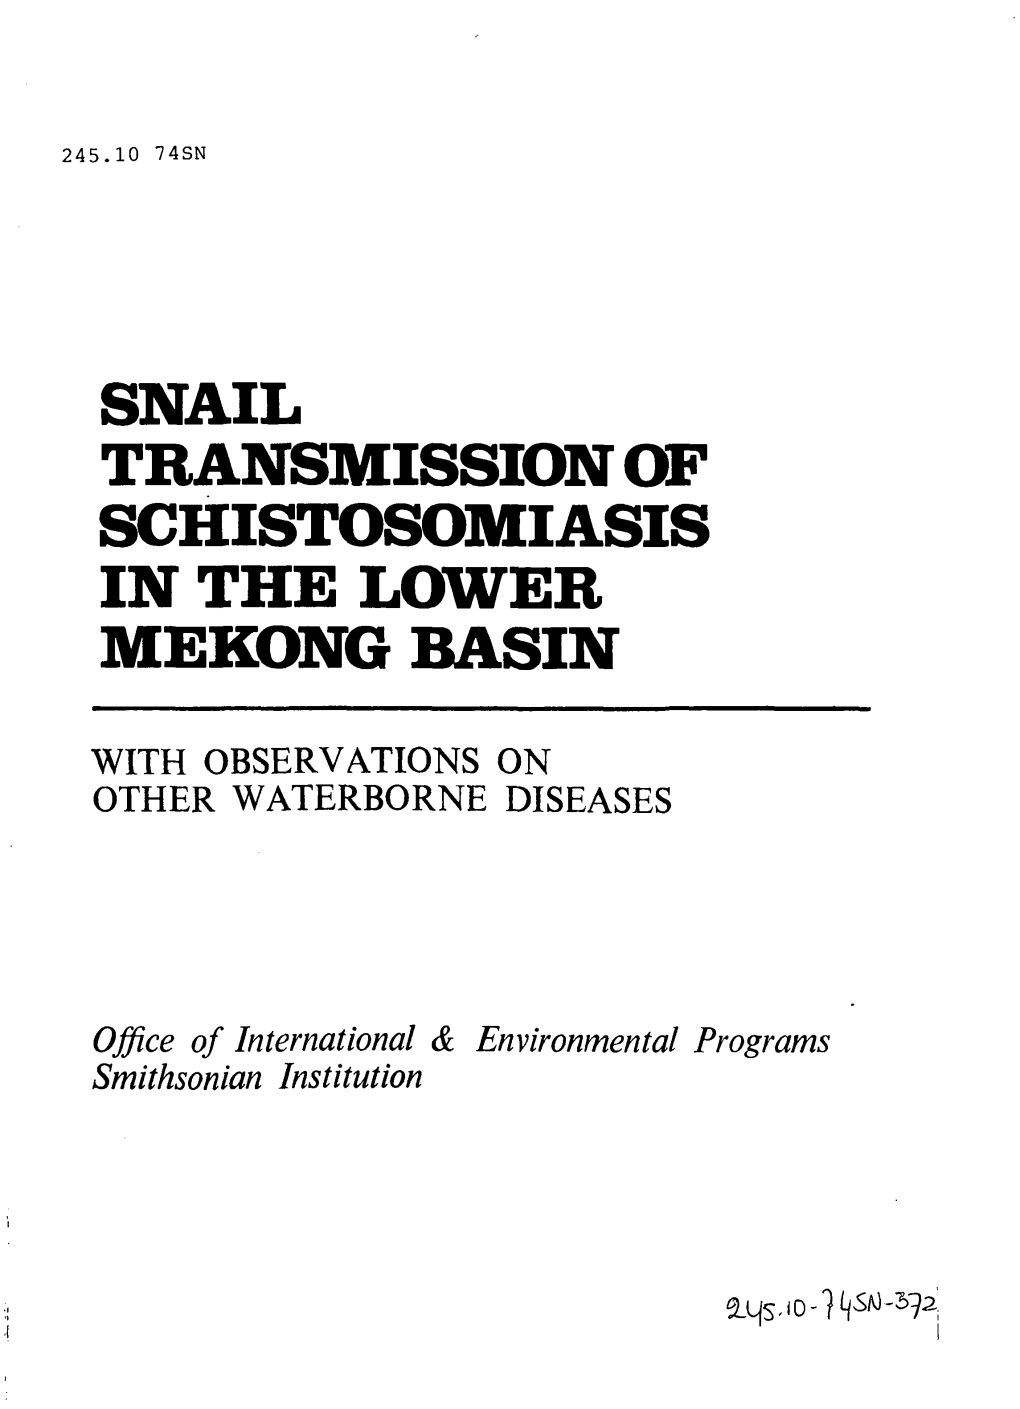 Snail Transmission of Schistosomiasis in the Lower Mekong Basin